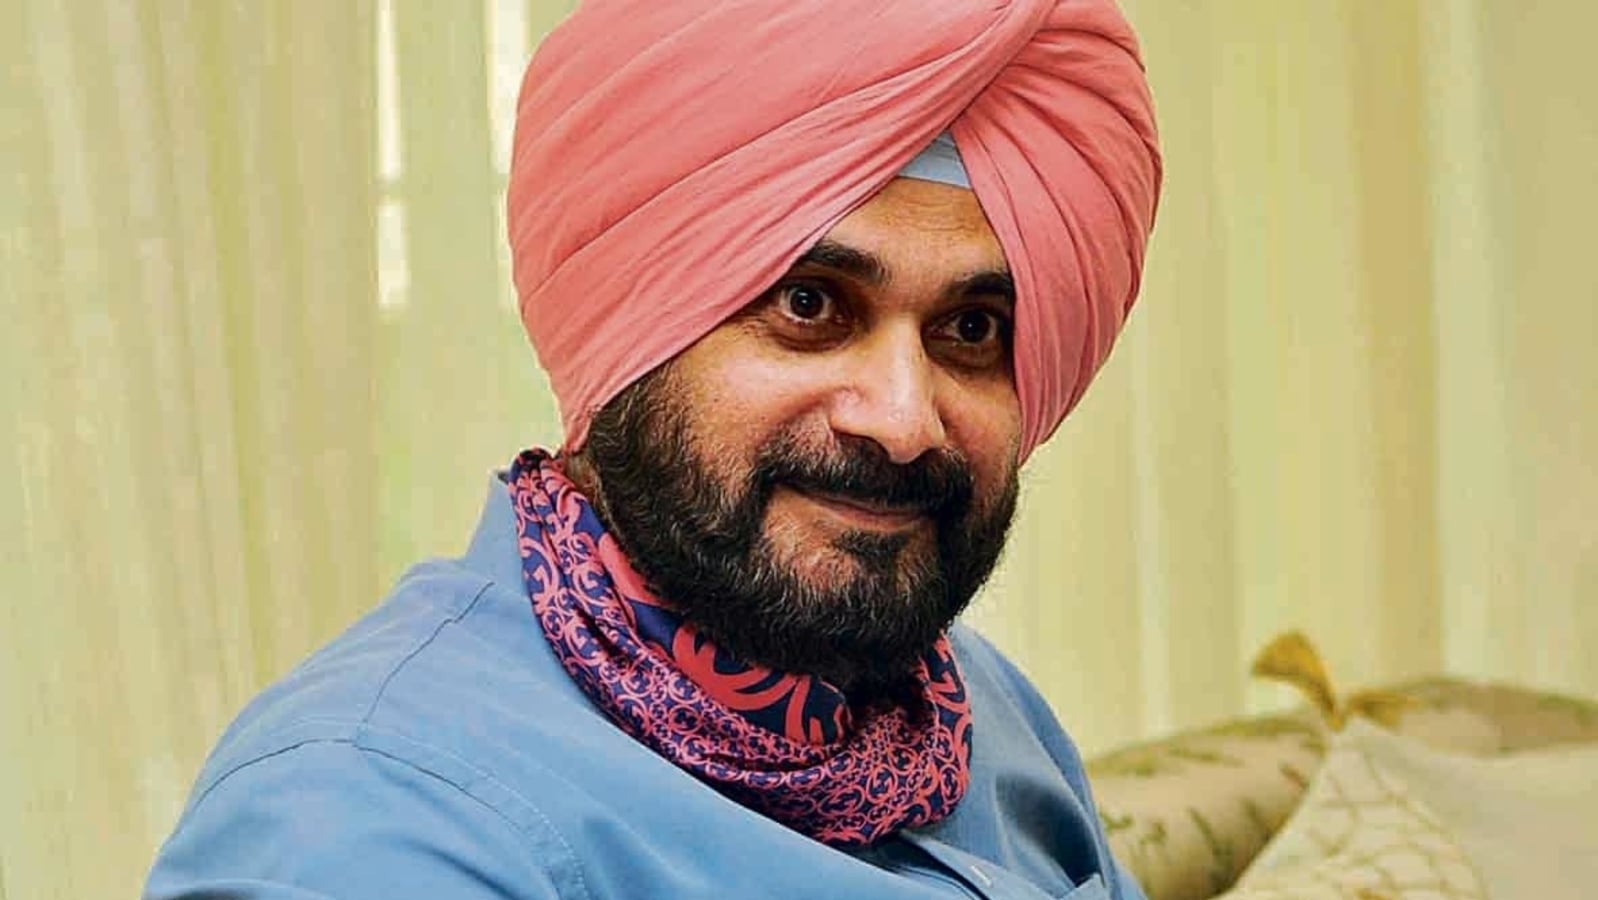 AAP always recognised my work, vision for Punjab: Navjot Singh Sidhu | Latest News India - Hindustan Times